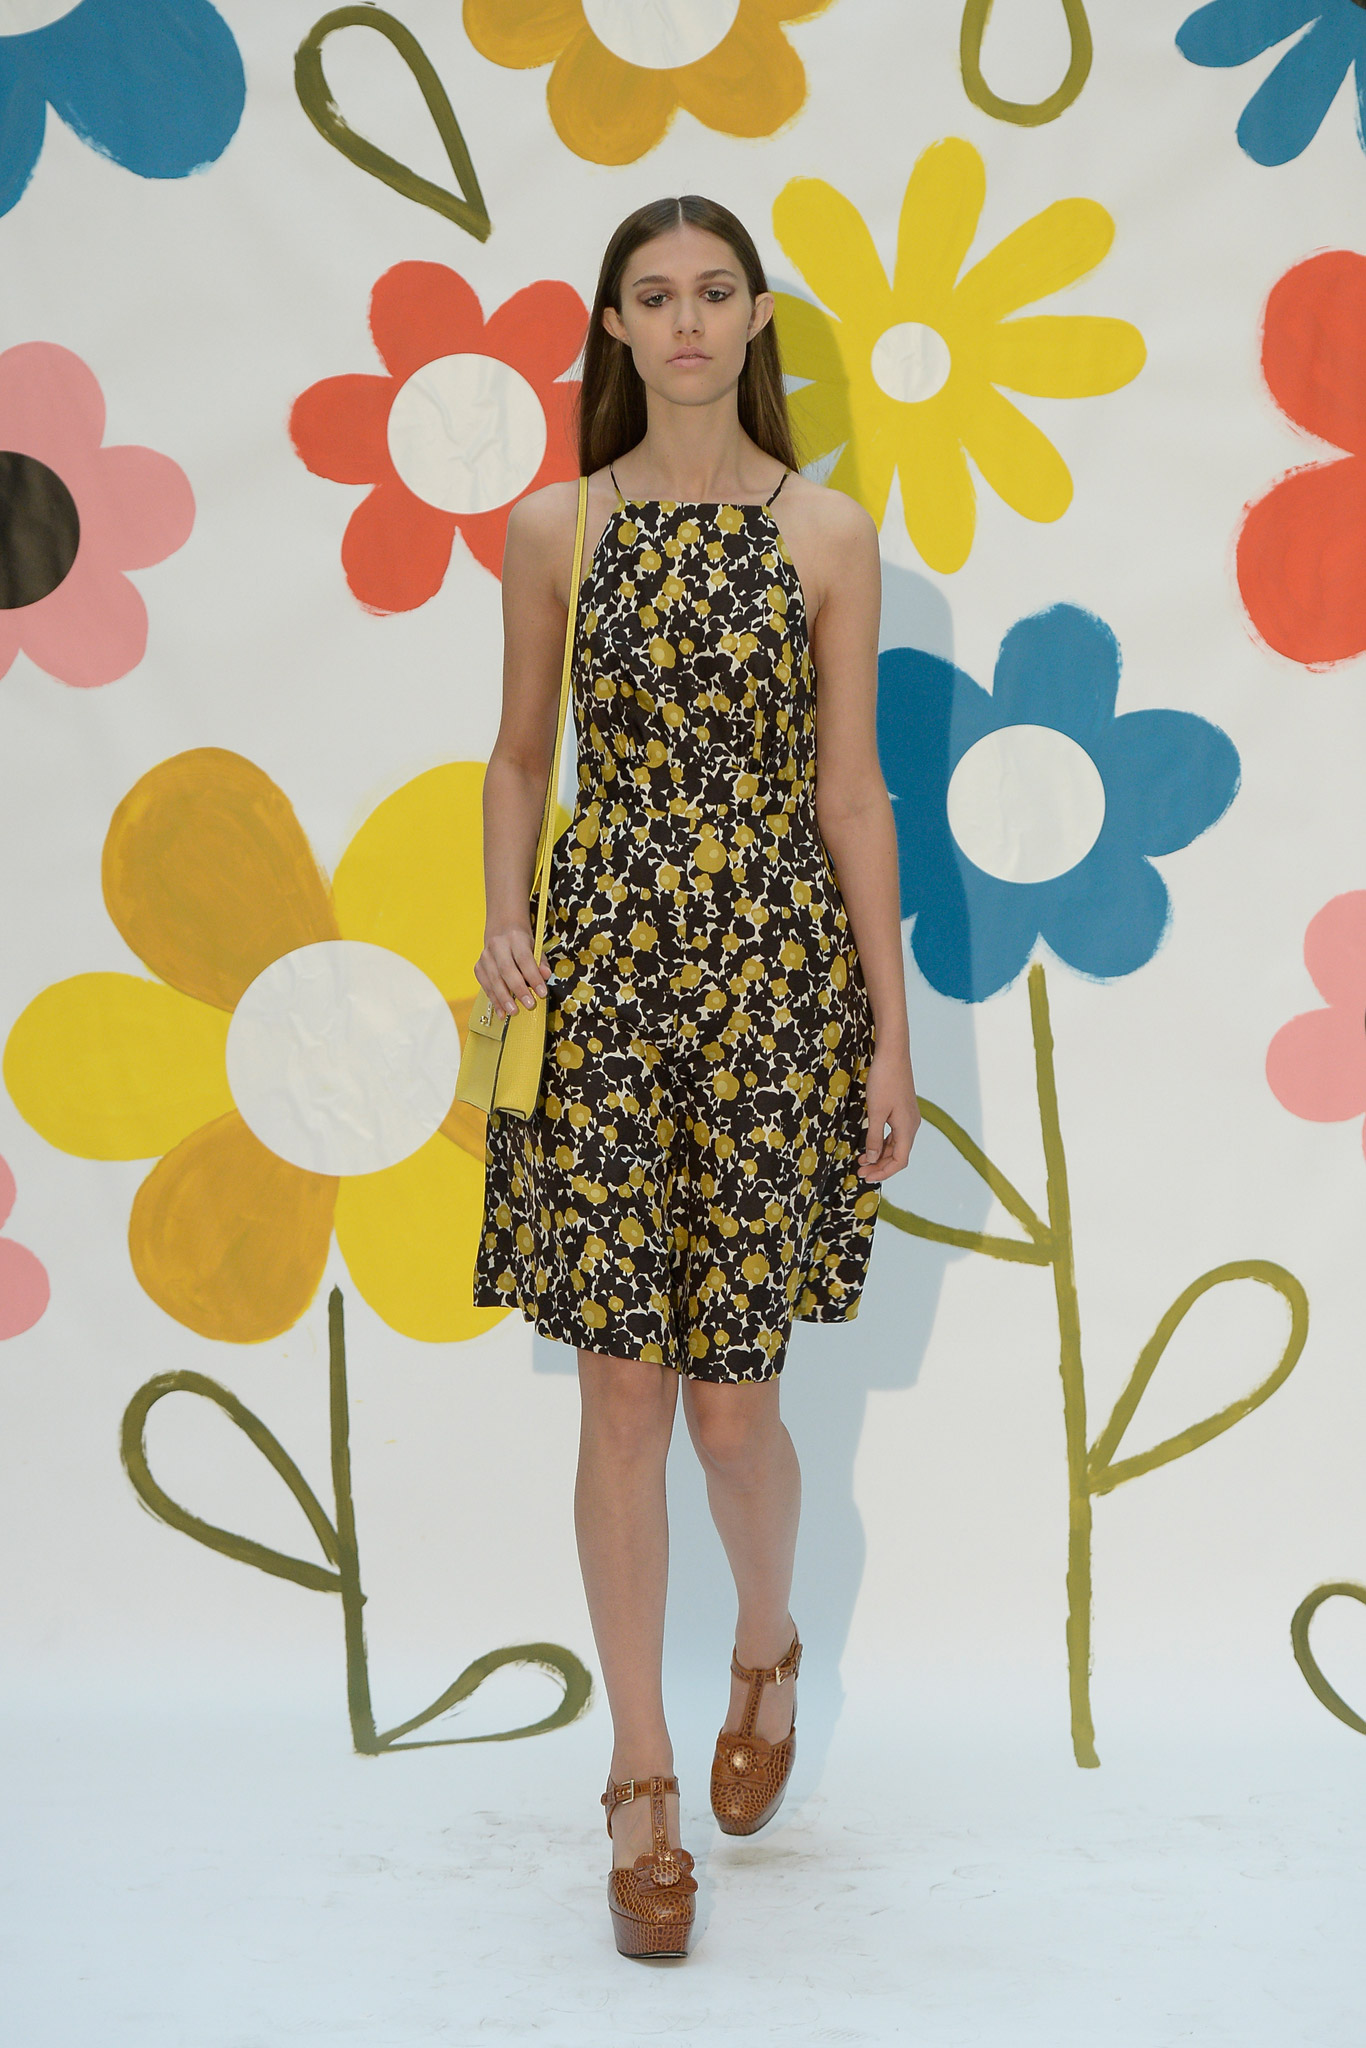 Sleeveless-Dresses-Are-In-Style-For-Spring-Summer-2015